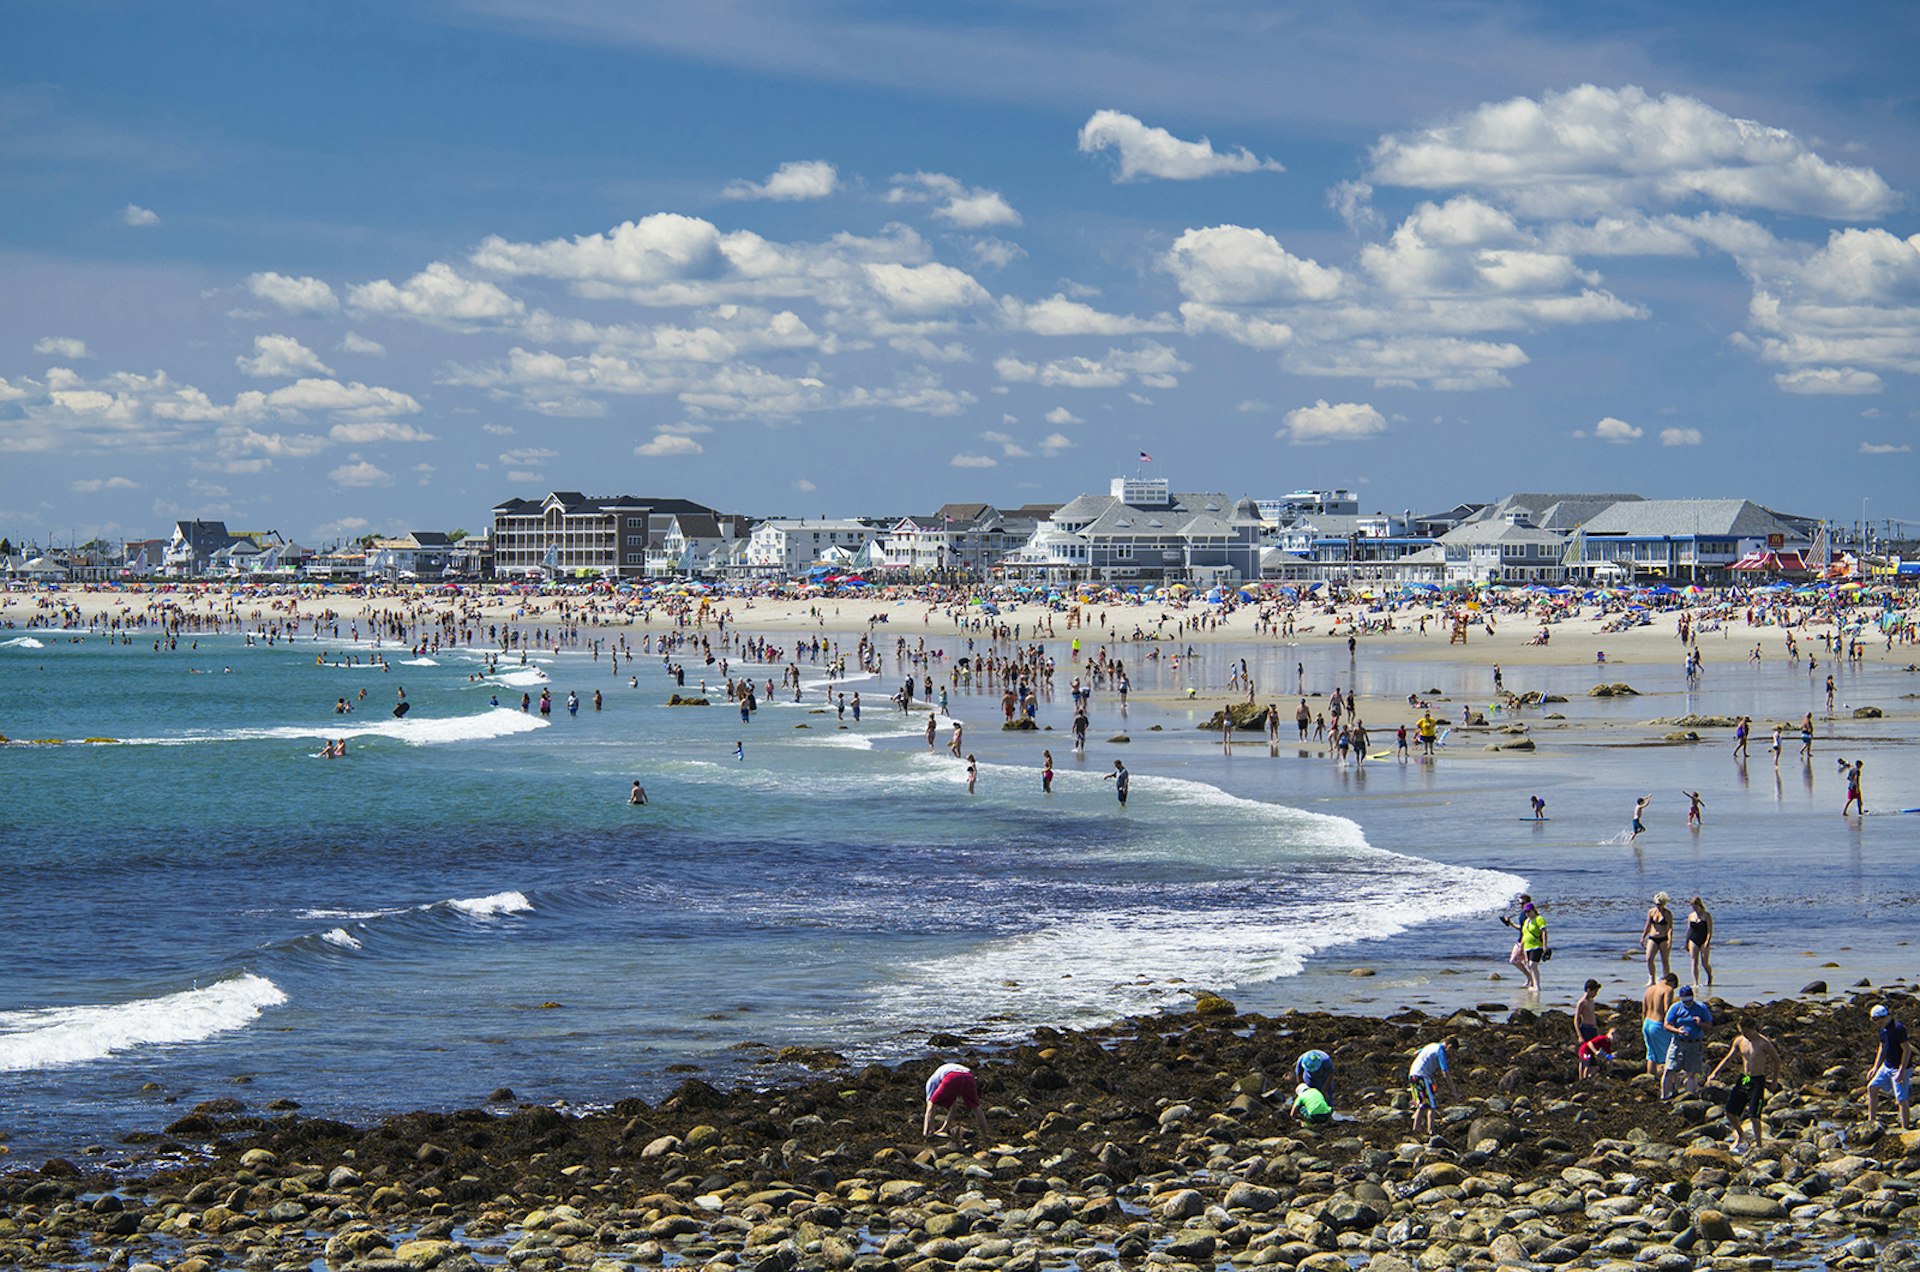 Features - People relaxing on sunny beach, Hampton Beach, New Hampshire, USA